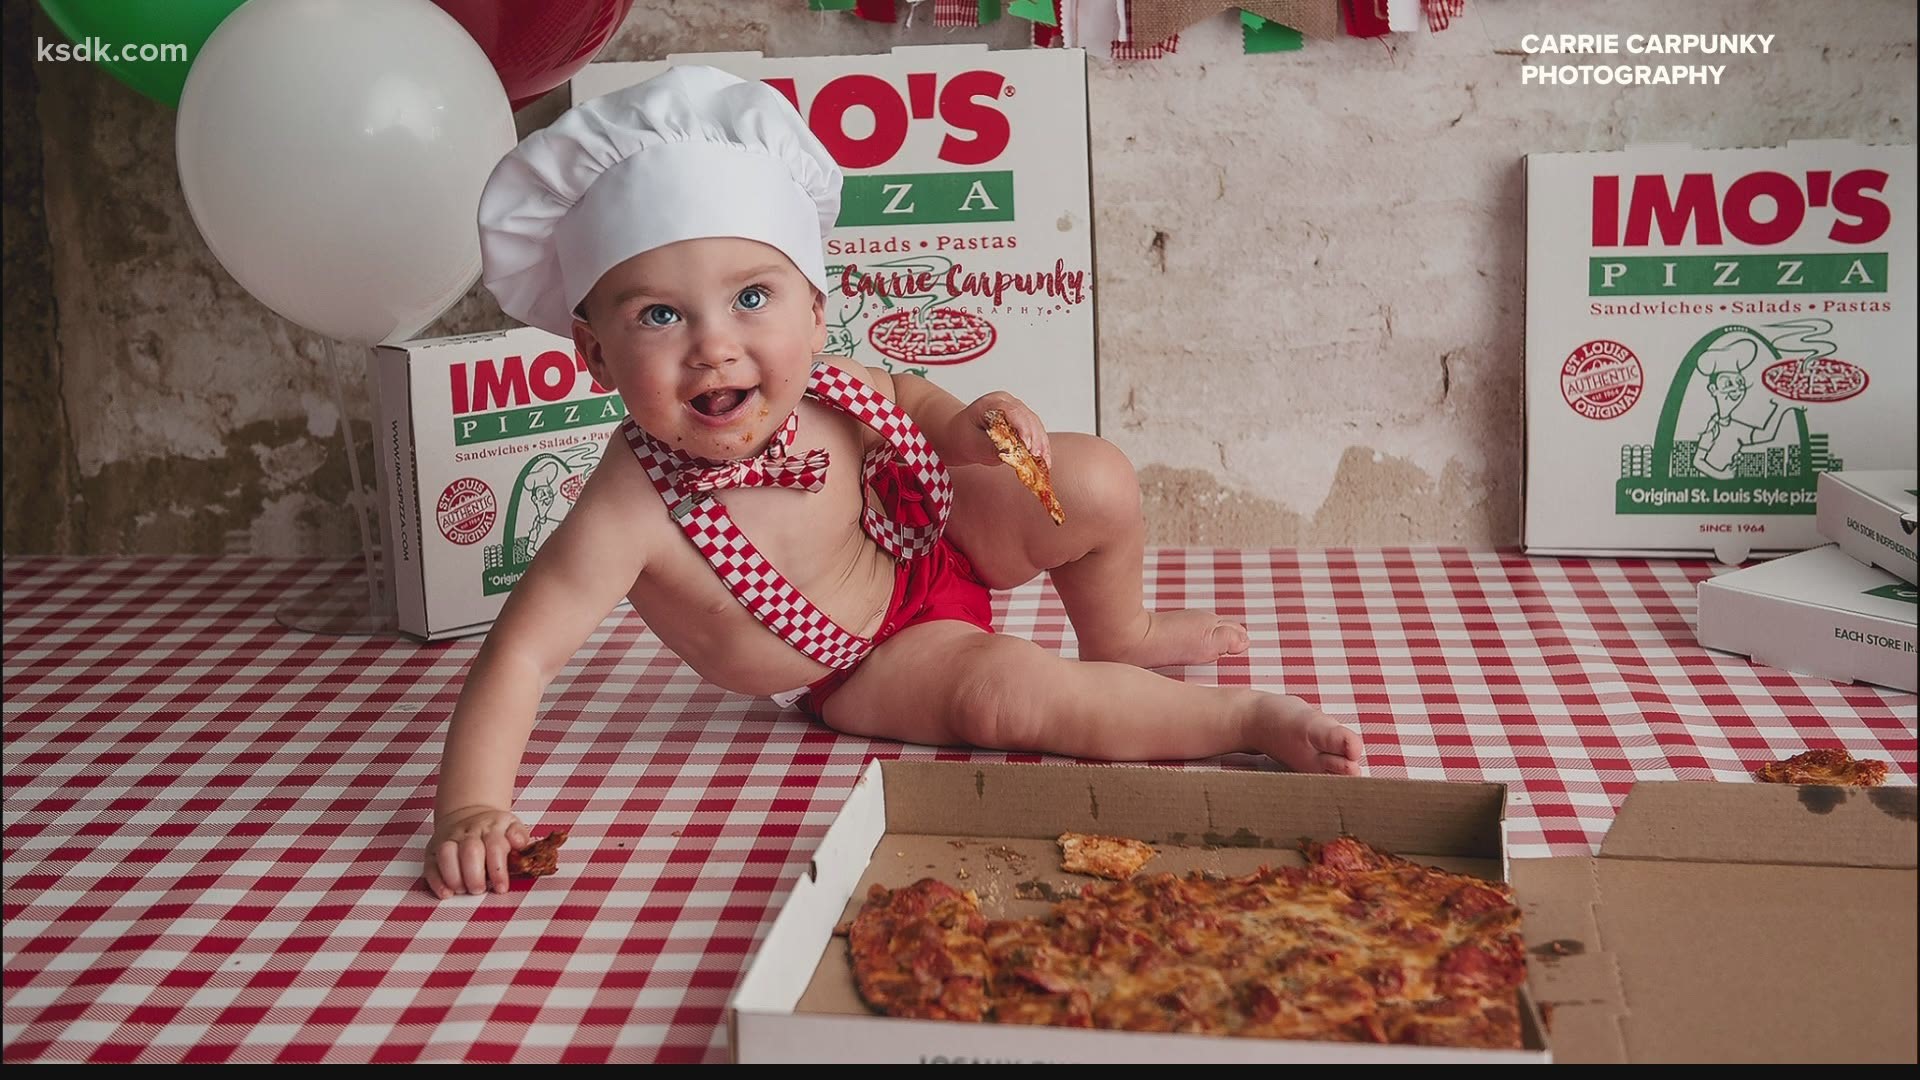 Imo's took notice and featured the baby on its Twitter account